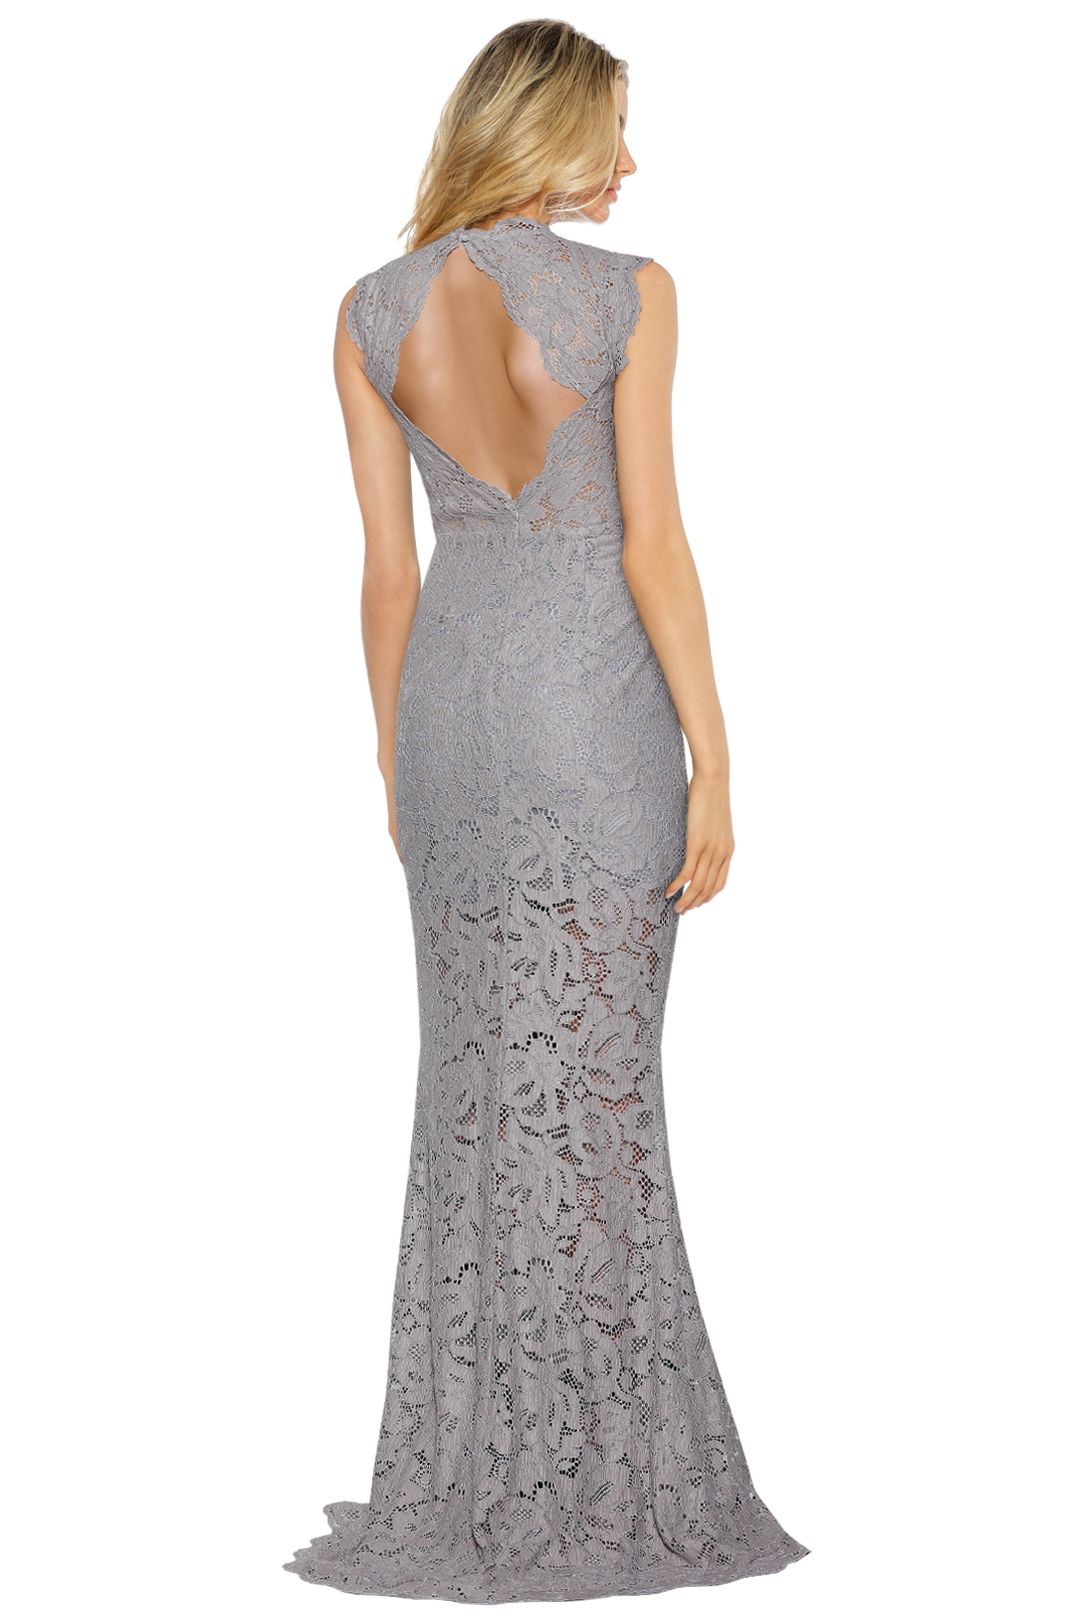 Grace and Hart - Valentine Gown - Silver - Back